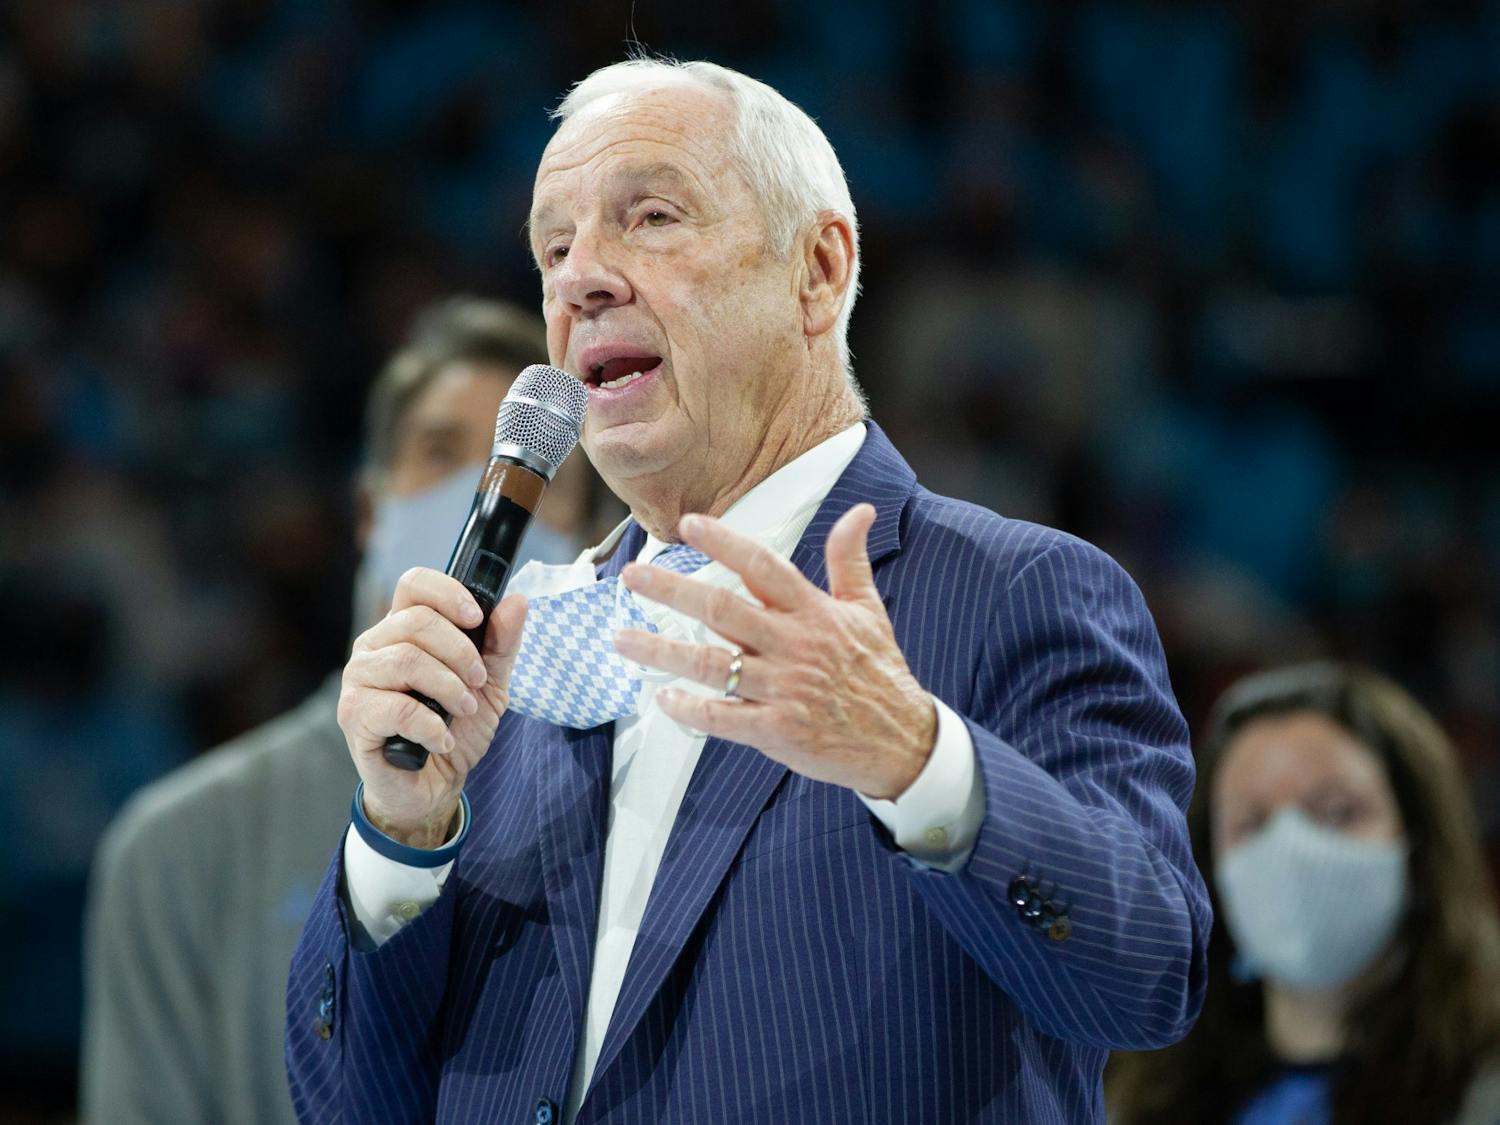 Former head coach of the North Carolina men’s basketball team Roy Williams was honored at the game against NC State at the Smith Center on Jan. 29, 2022. The 1982 National Championship team was also honored during a timeout. The Tar Heels beat rivals NC State 100-80.&nbsp;